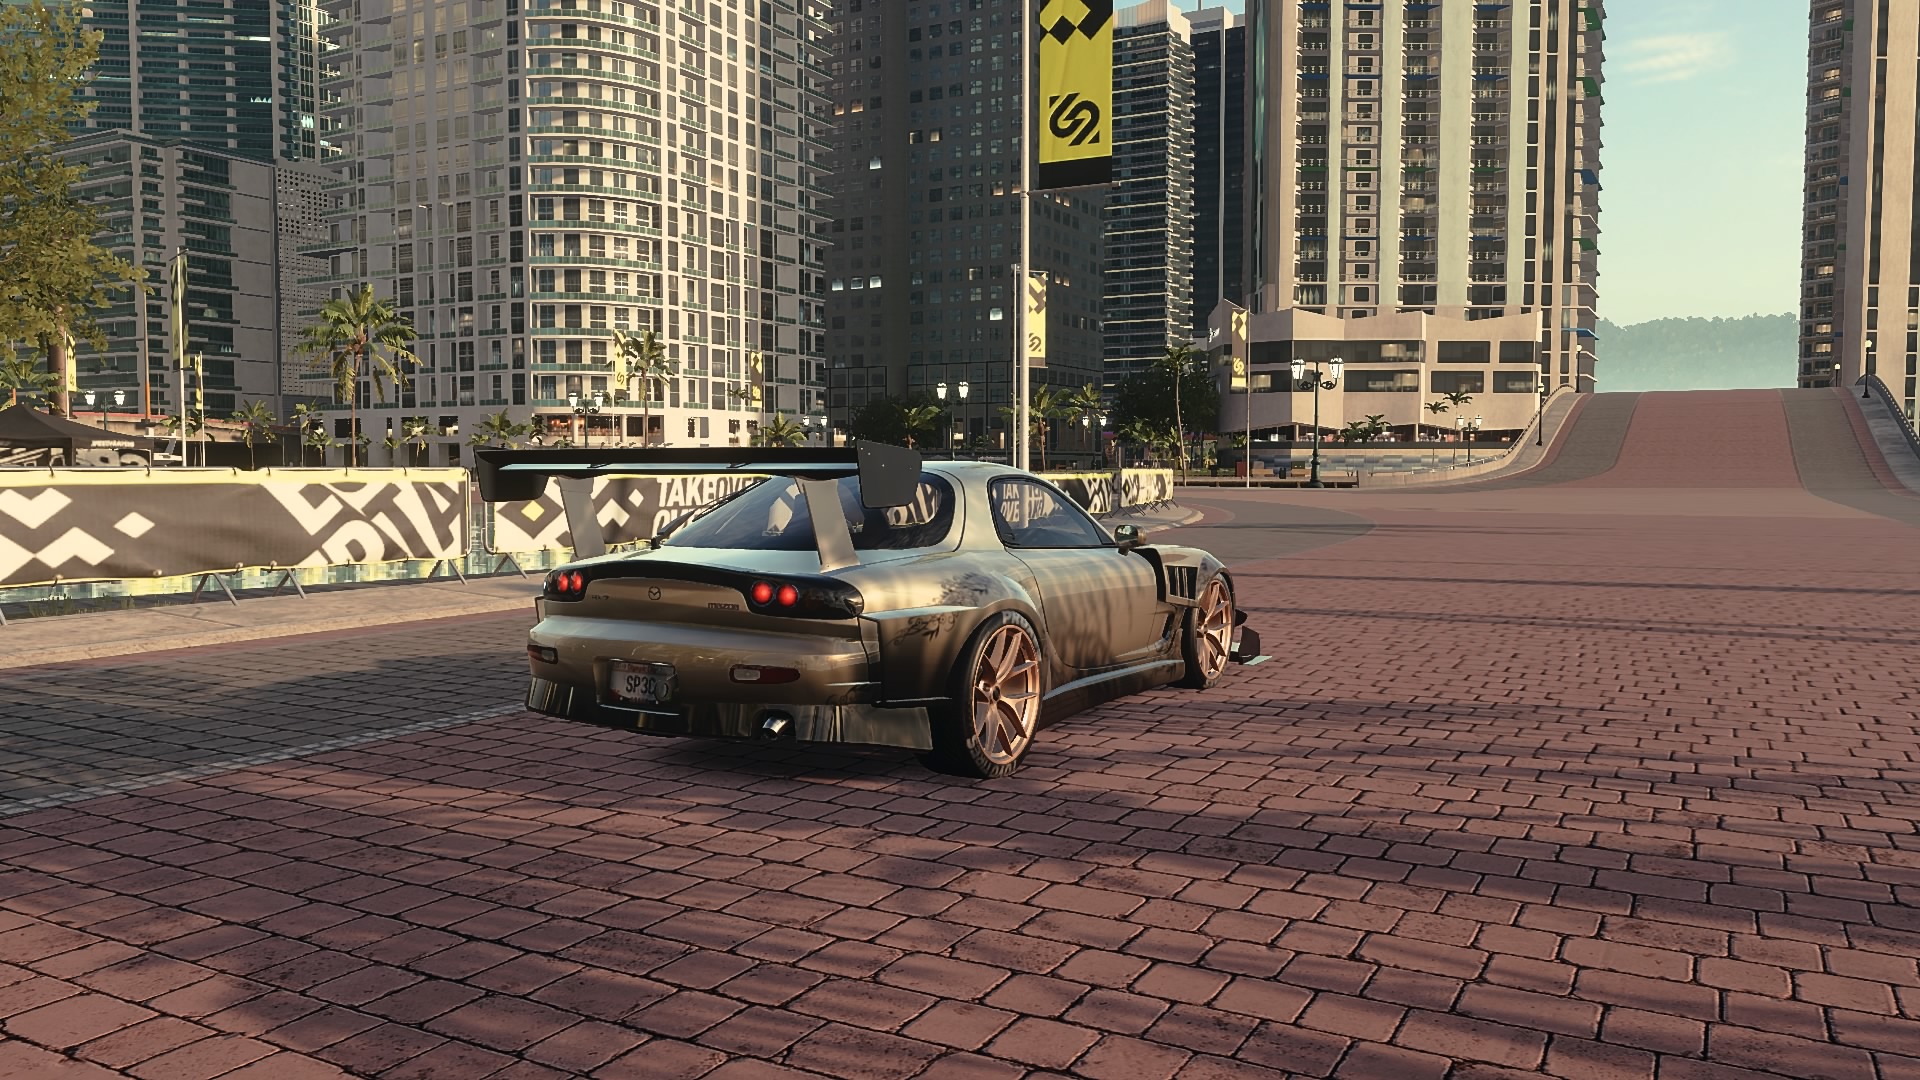 General 1920x1080 car Need for Speed: Heat video games PlayStation 4 gold video game art Mazda RX-7 taillights vehicle building rear view CGI sign palm trees